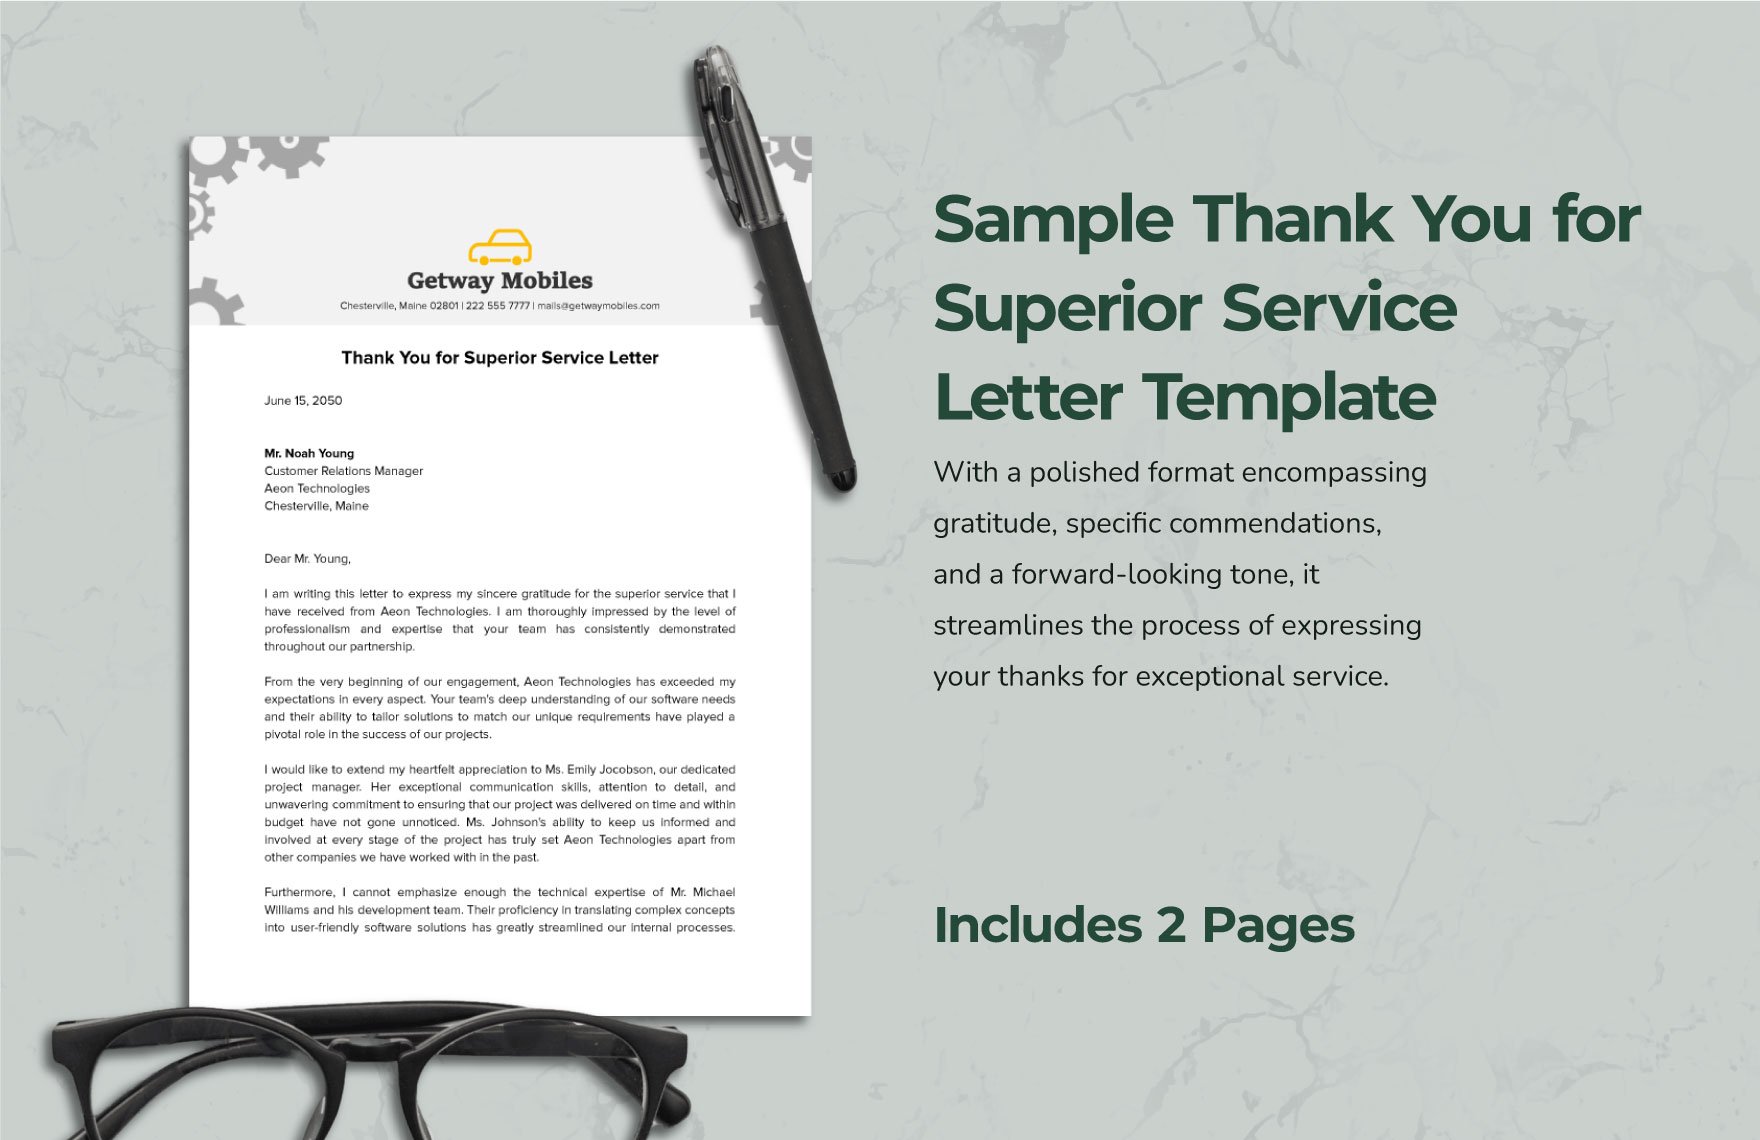 sample-thank-you-for-superior-service-letter